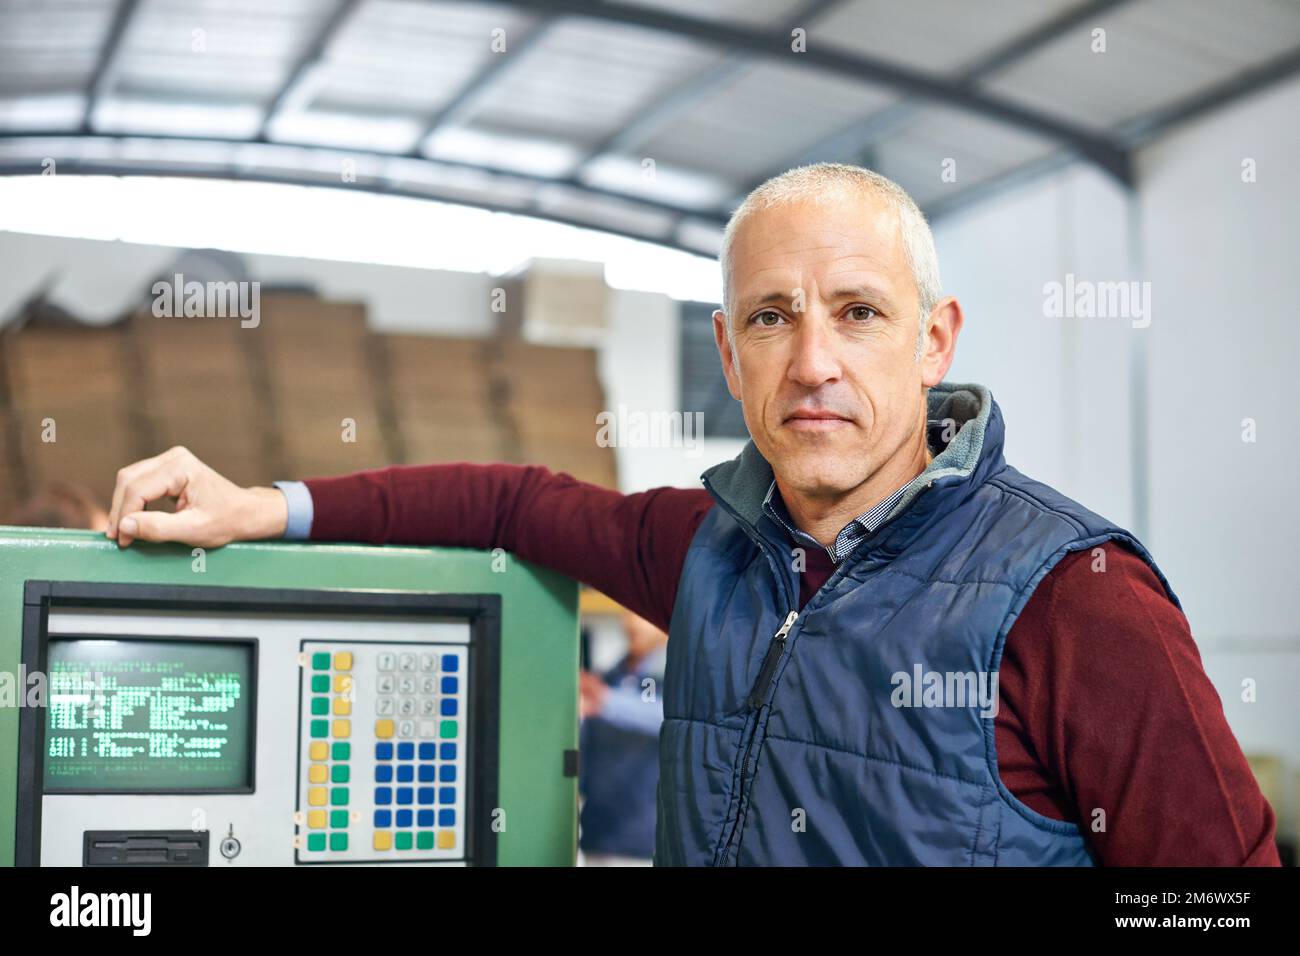 It runs as well as the day it was made. Portrait of a mature man standing next to machinery in a factory. Stock Photo